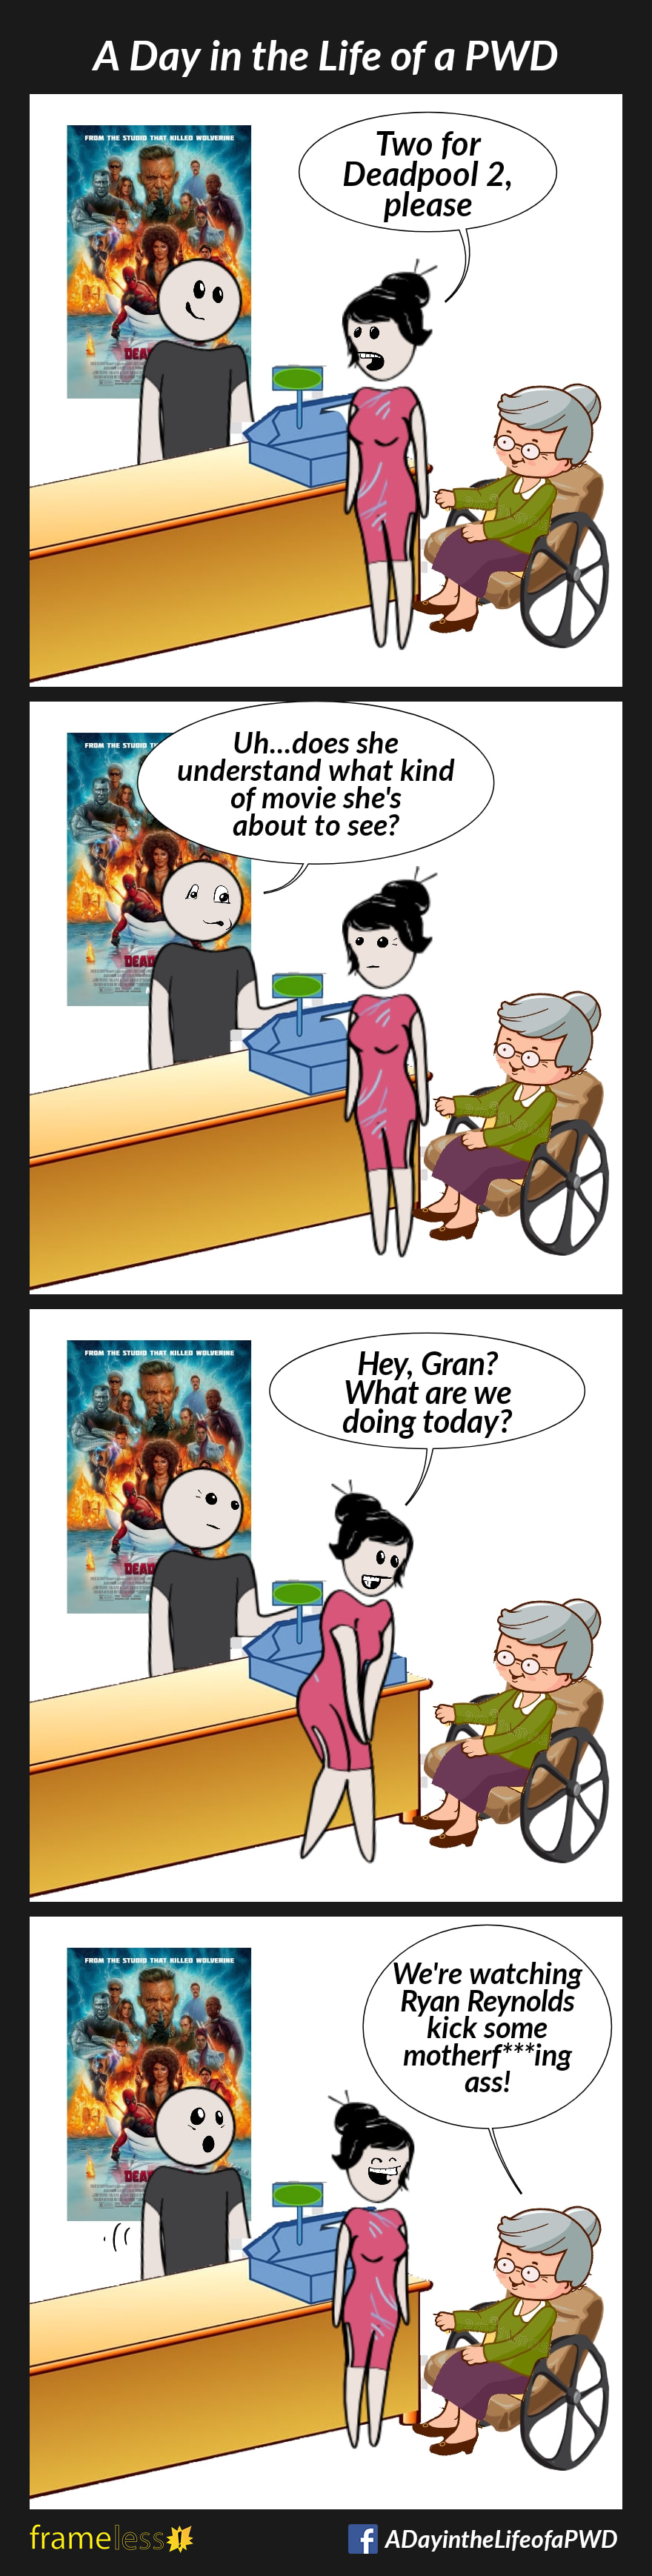 COMIC STRIP 
A Day in the Life of a PWD (Person With a Disability) 

Frame 1:
An elderly woman in a wheelchair and her granddaughter are purchasing tickets at a movie theatre.
GRANDDAUGHTER (to cashier): Two for Deadpool 2 please.

Frame 2:
CASHIER: Uh...does she understand what king of movie she's about to see?

Frame 3:
GRANDDAUGHTER (to grandmother): Hey, Gran? What are we doing today?

Frame 4:
GRANDMOTHER: We're watching Ryan Reynolds kick some motherf***ing ass!
Granddaughter laughs.